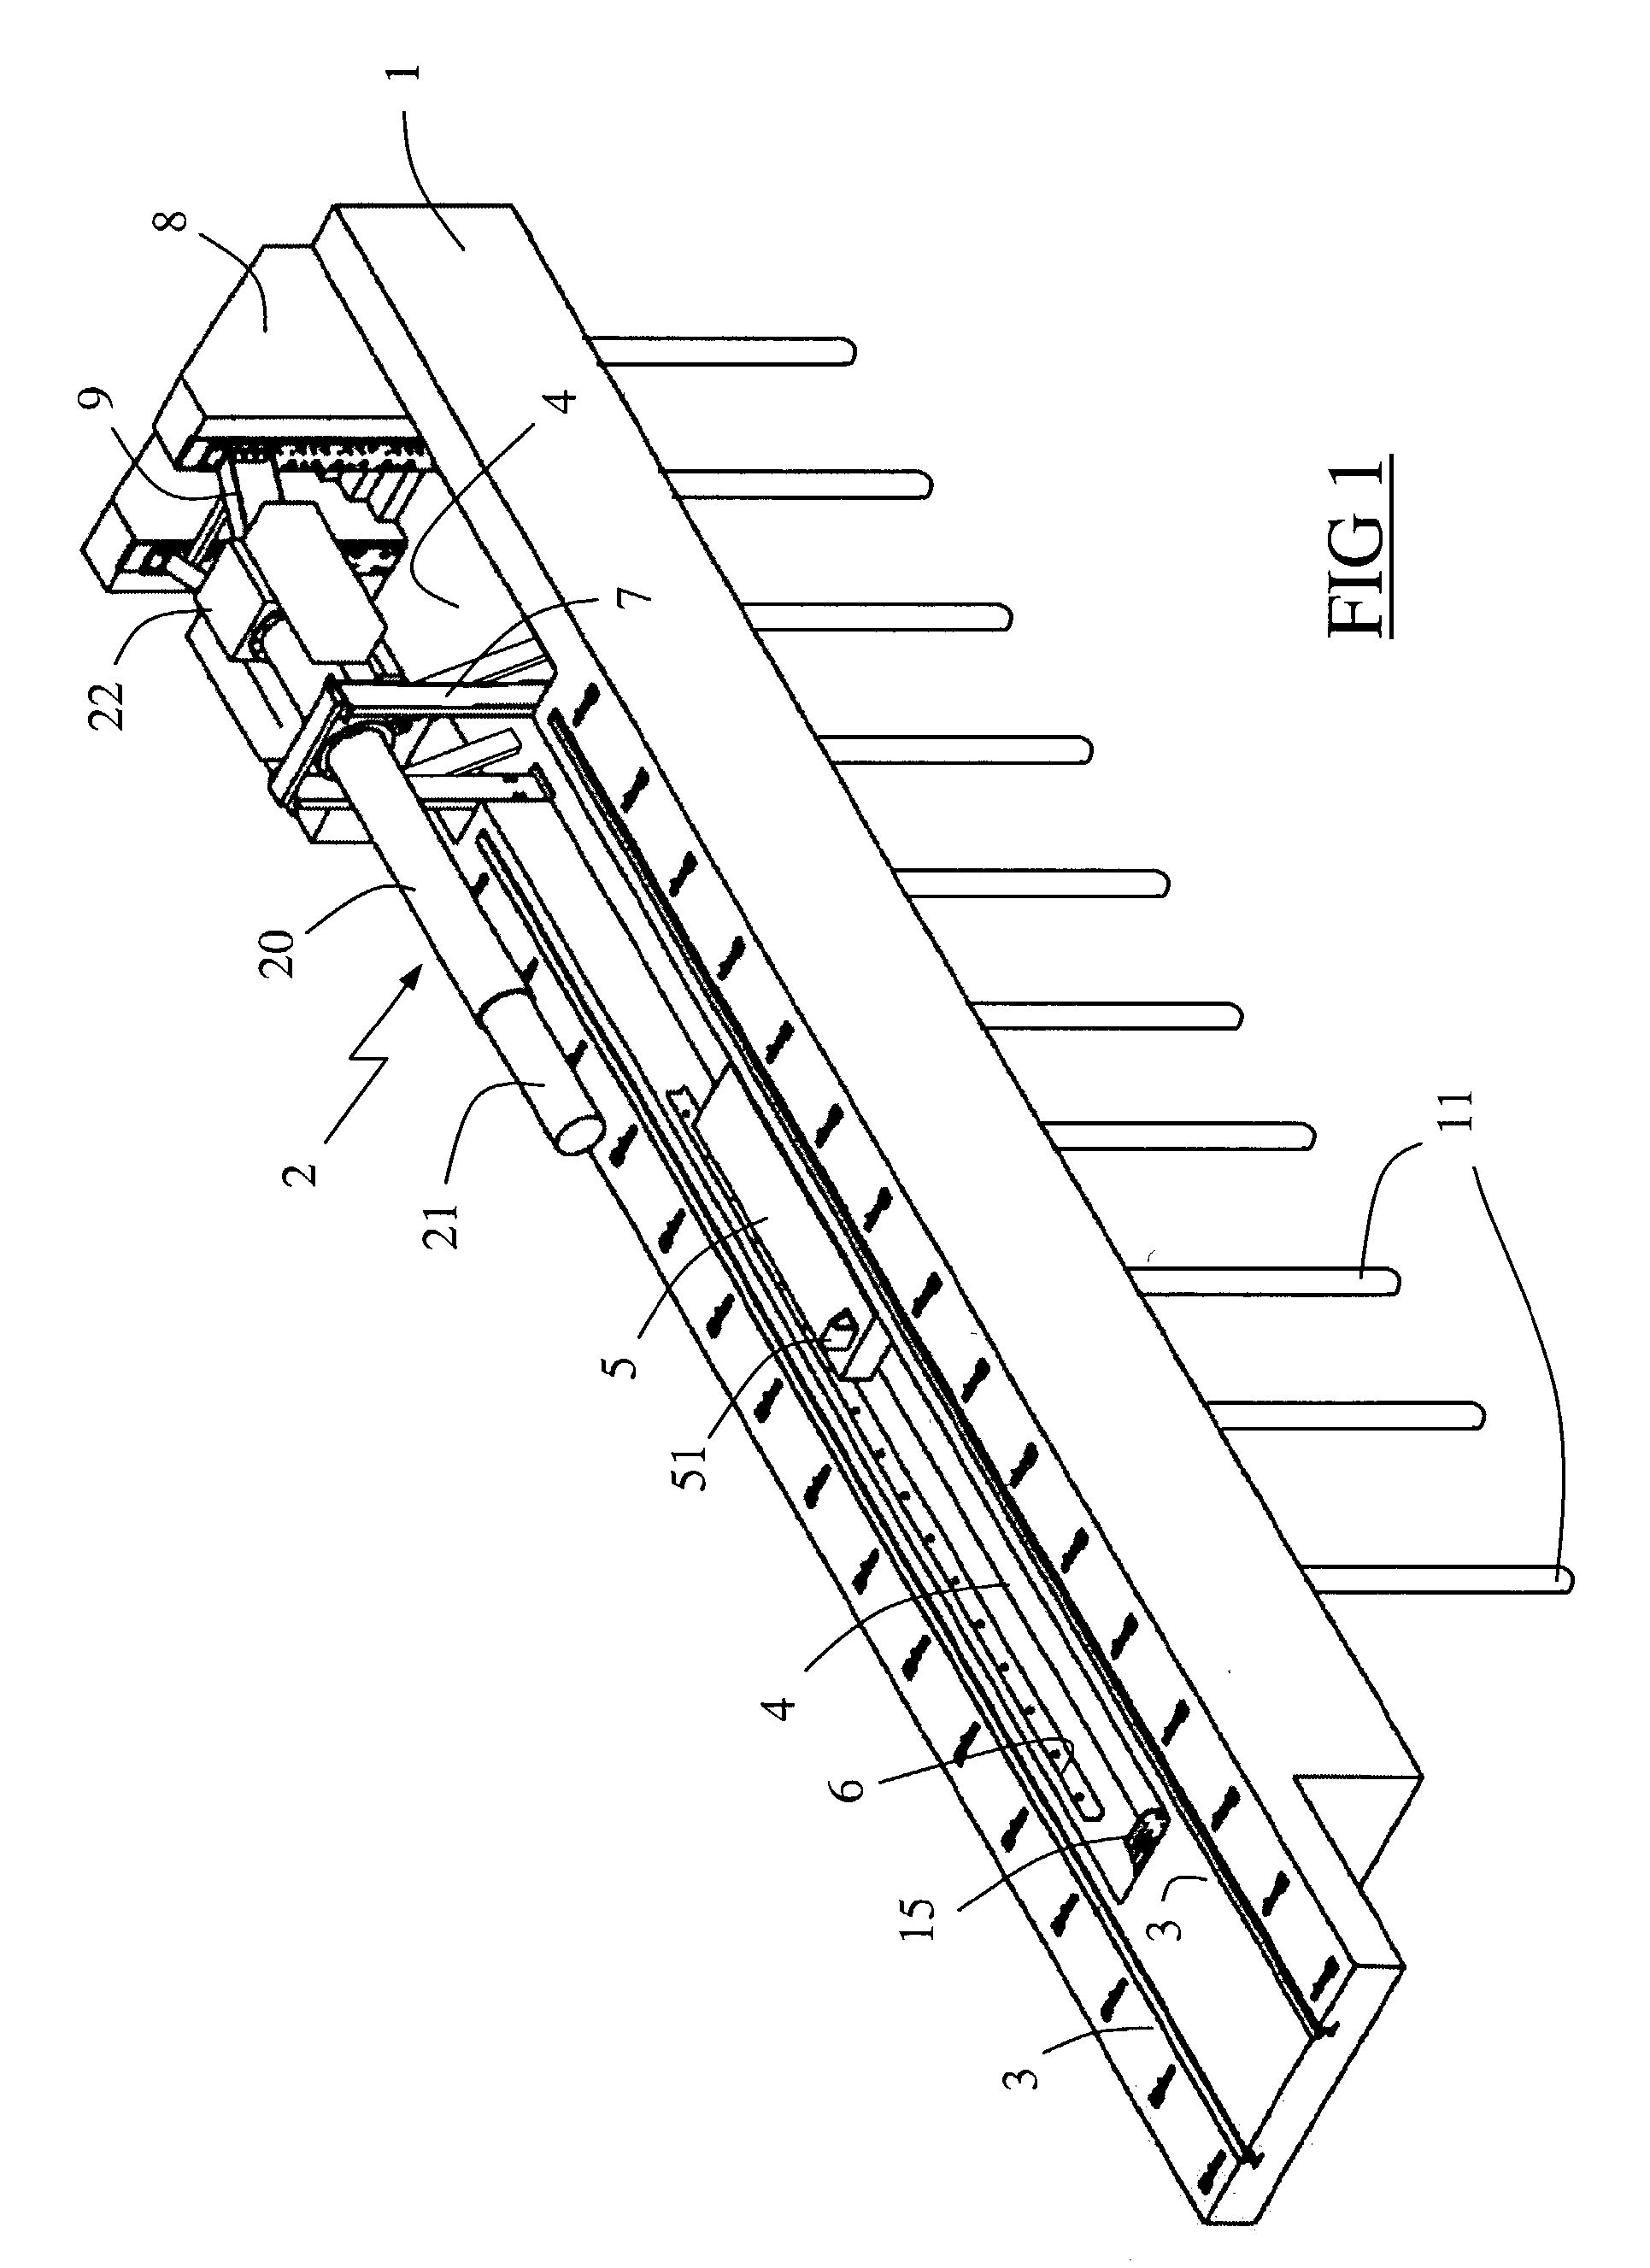 Apparatus for performing mechanical tests on structures